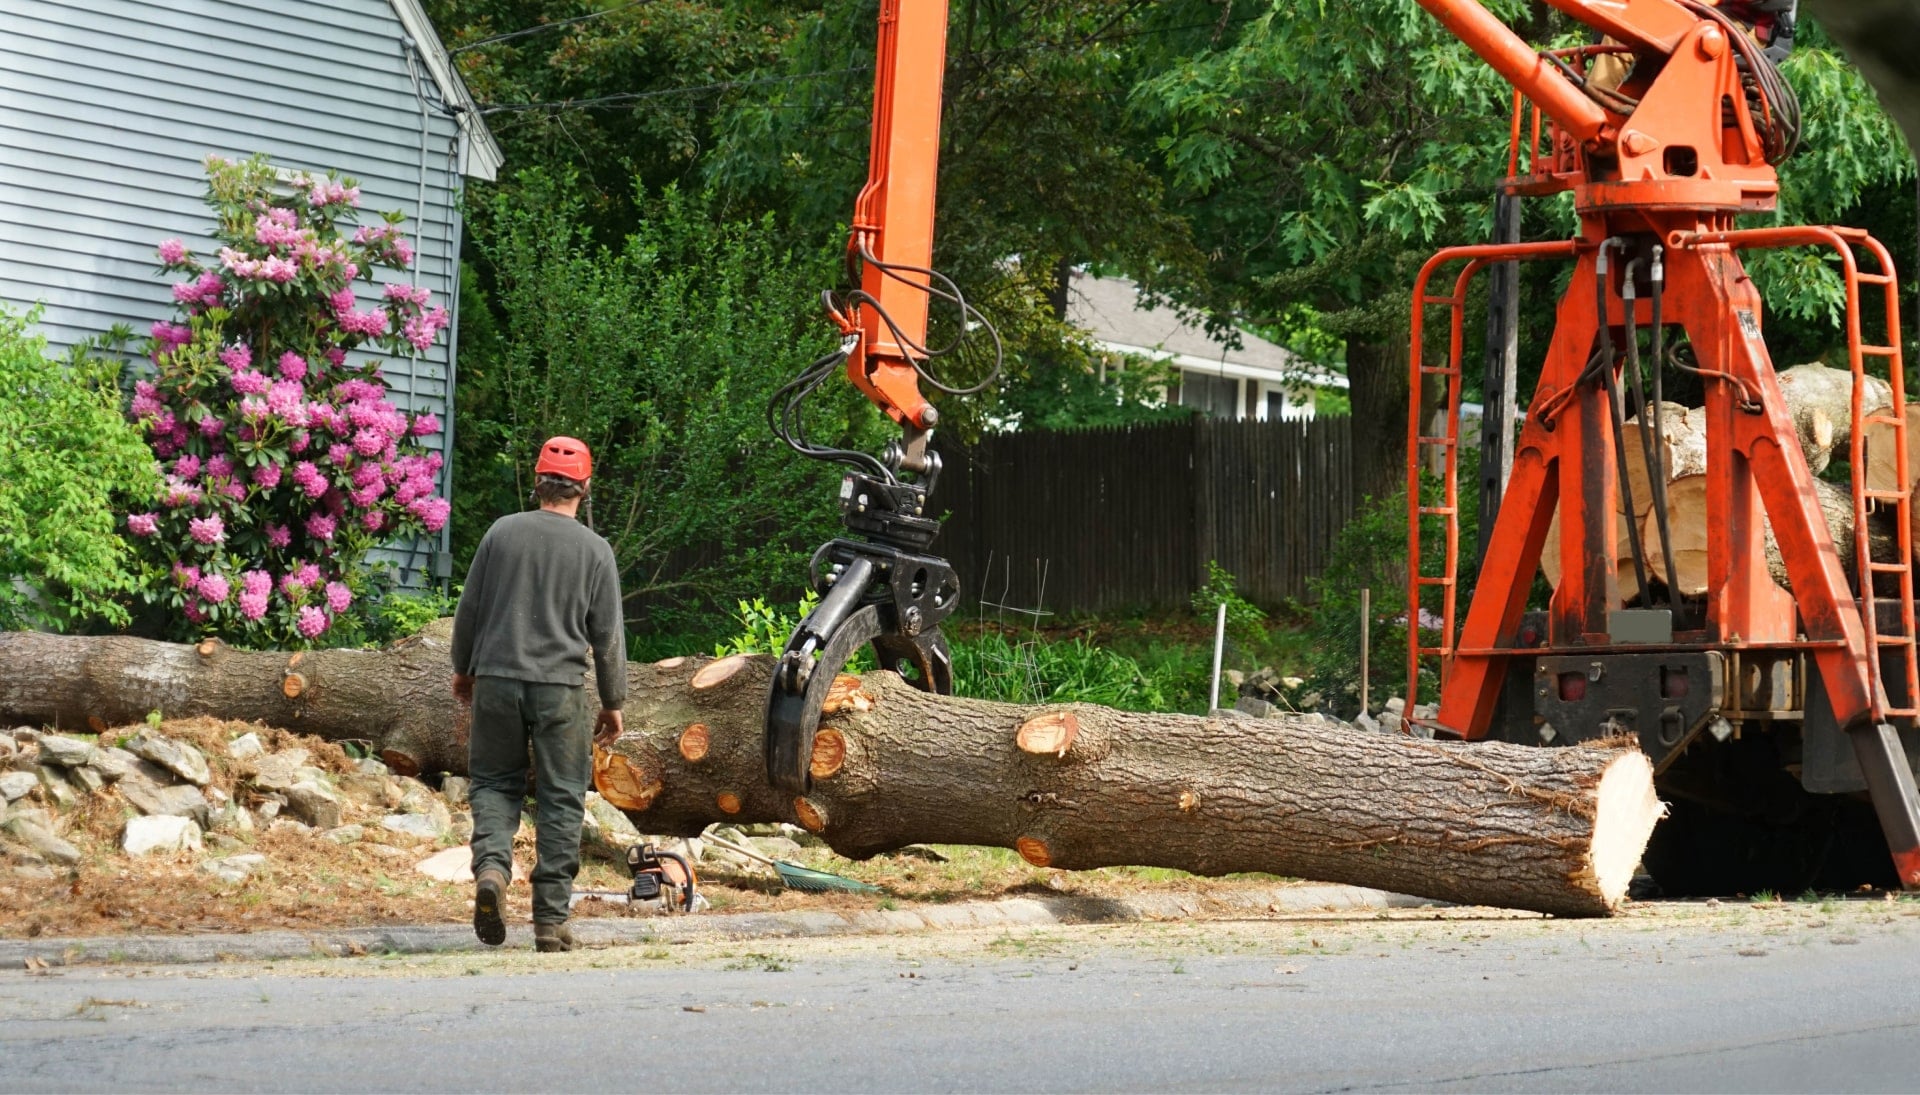 Local partner for Tree removal services in Myrtle Beach